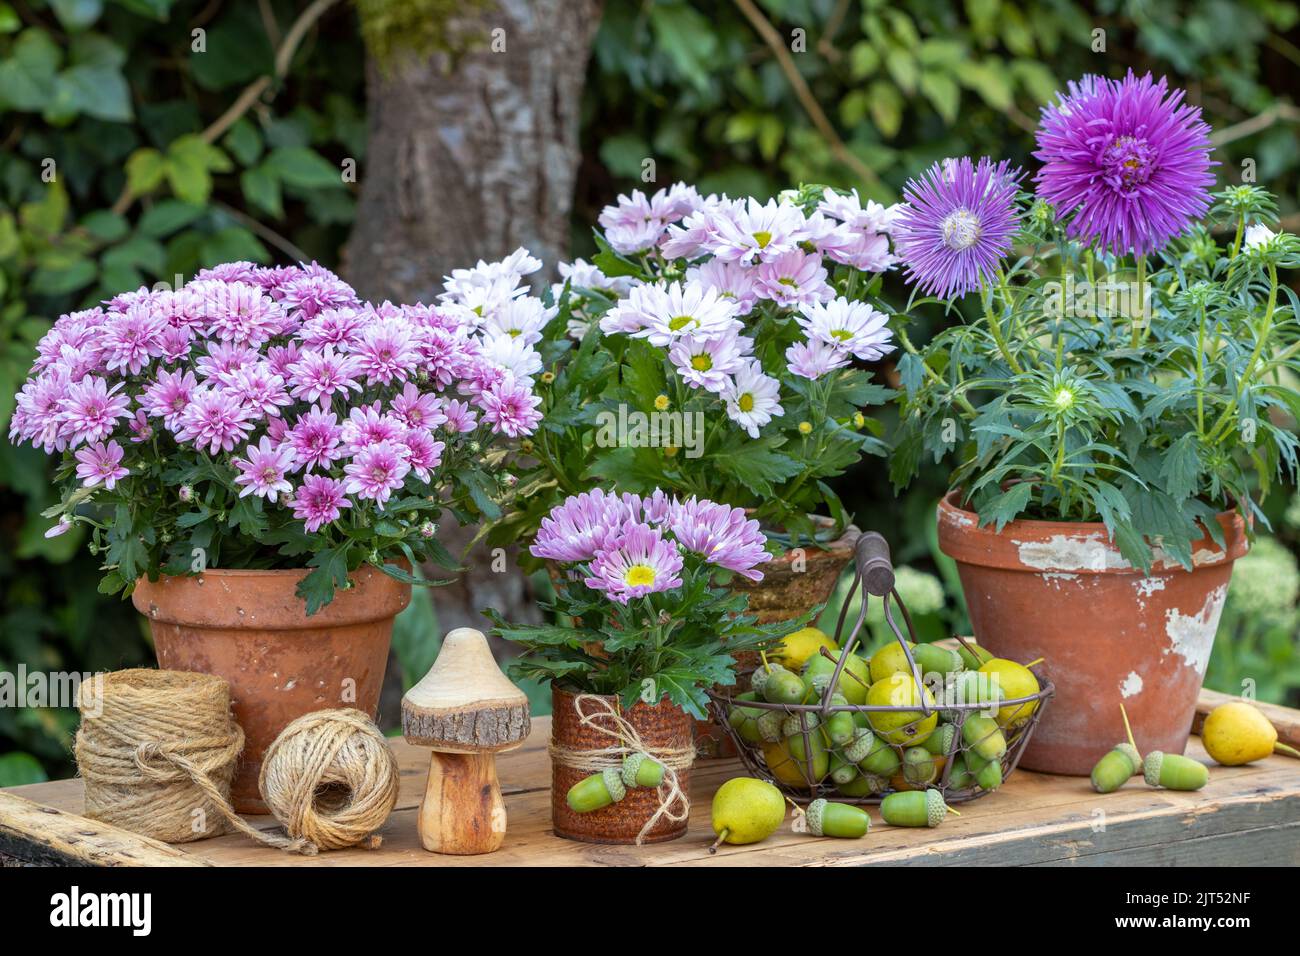 rustic arrangement with purple chrysanthemums and asters in terracotta pots in garden Stock Photo